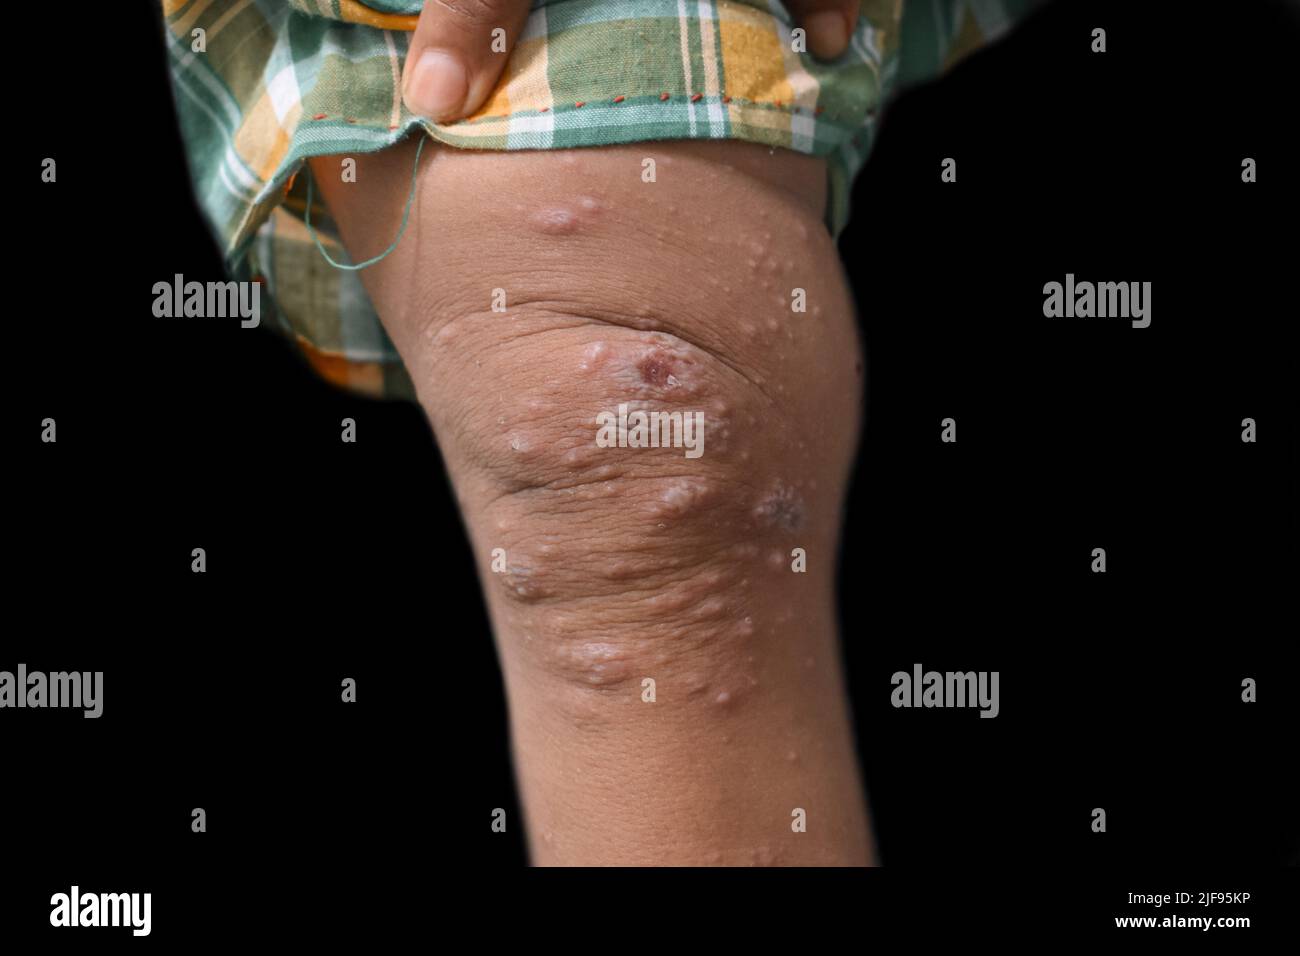 Scabies Infestation with secondary or superimposed bacterial infection and pustules in leg of Southeast Asian, Burmese child. Stock Photo